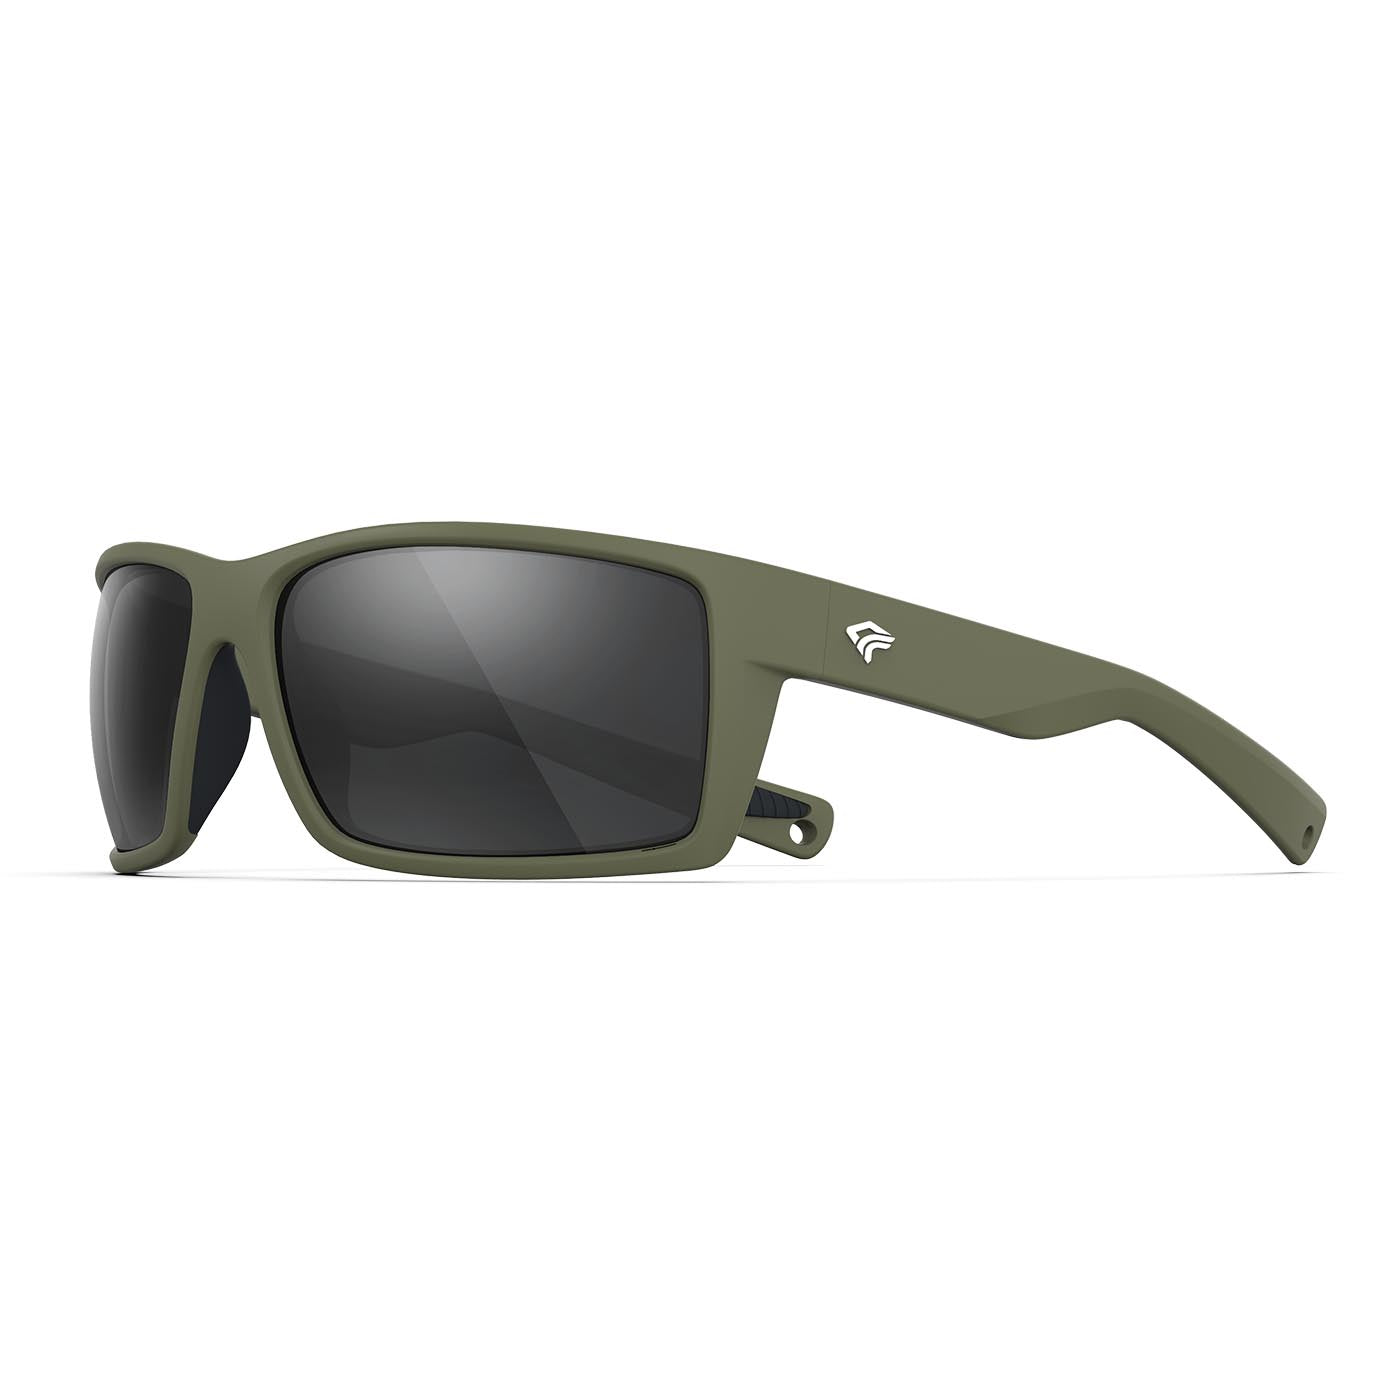 Black Sandstone Polarized Sports Sunglasses for Men and Women With Lifetime  Warranty - Perfect for Sports, Fishing, Boating, Beach, Golf & Driving -  Black Frame & Black Lens